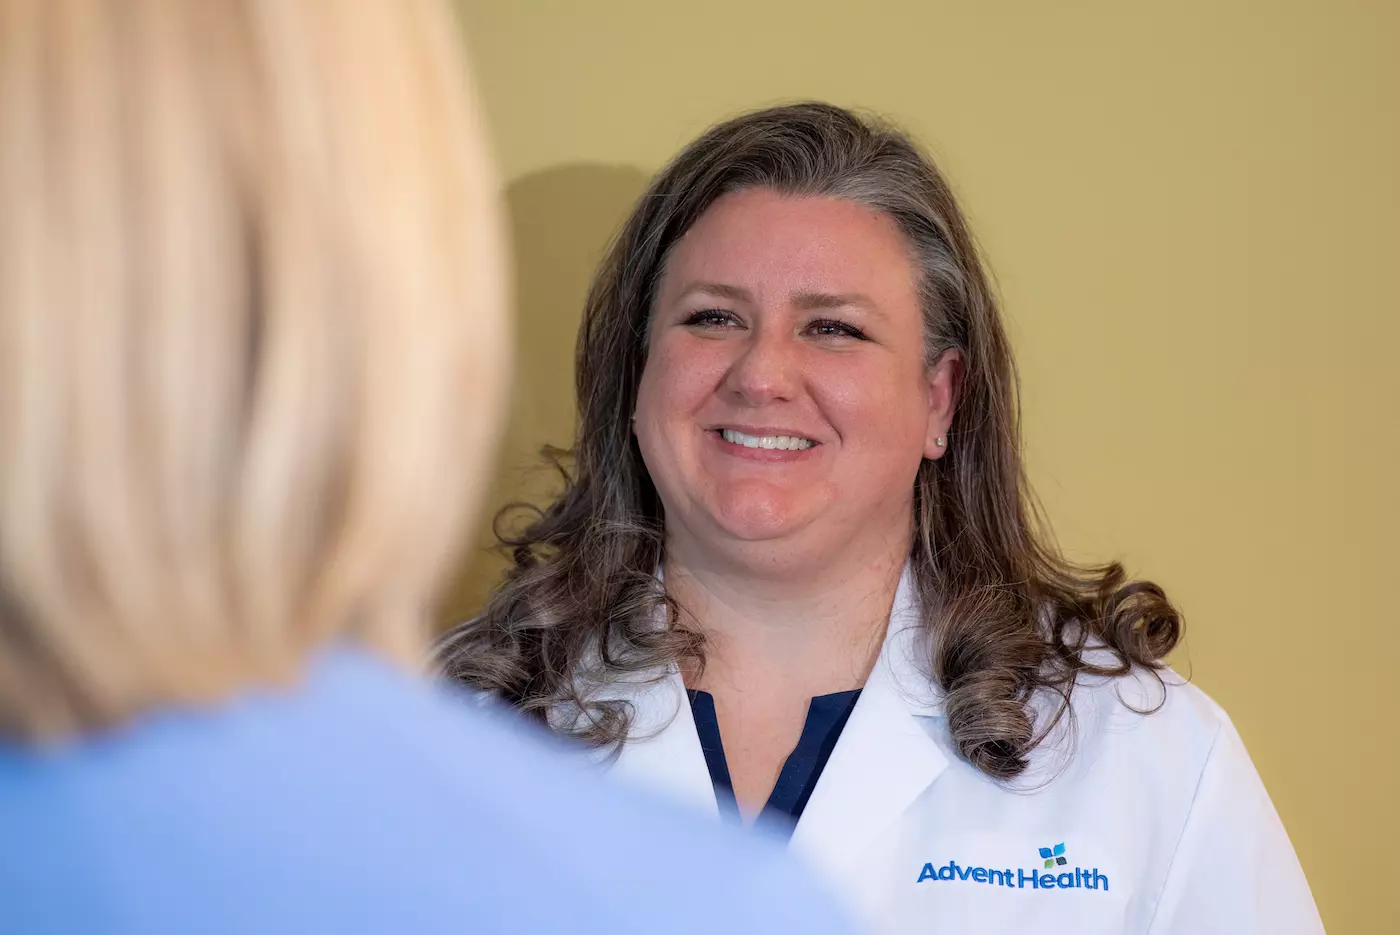 Christina Douglass, MD speaks with a patient